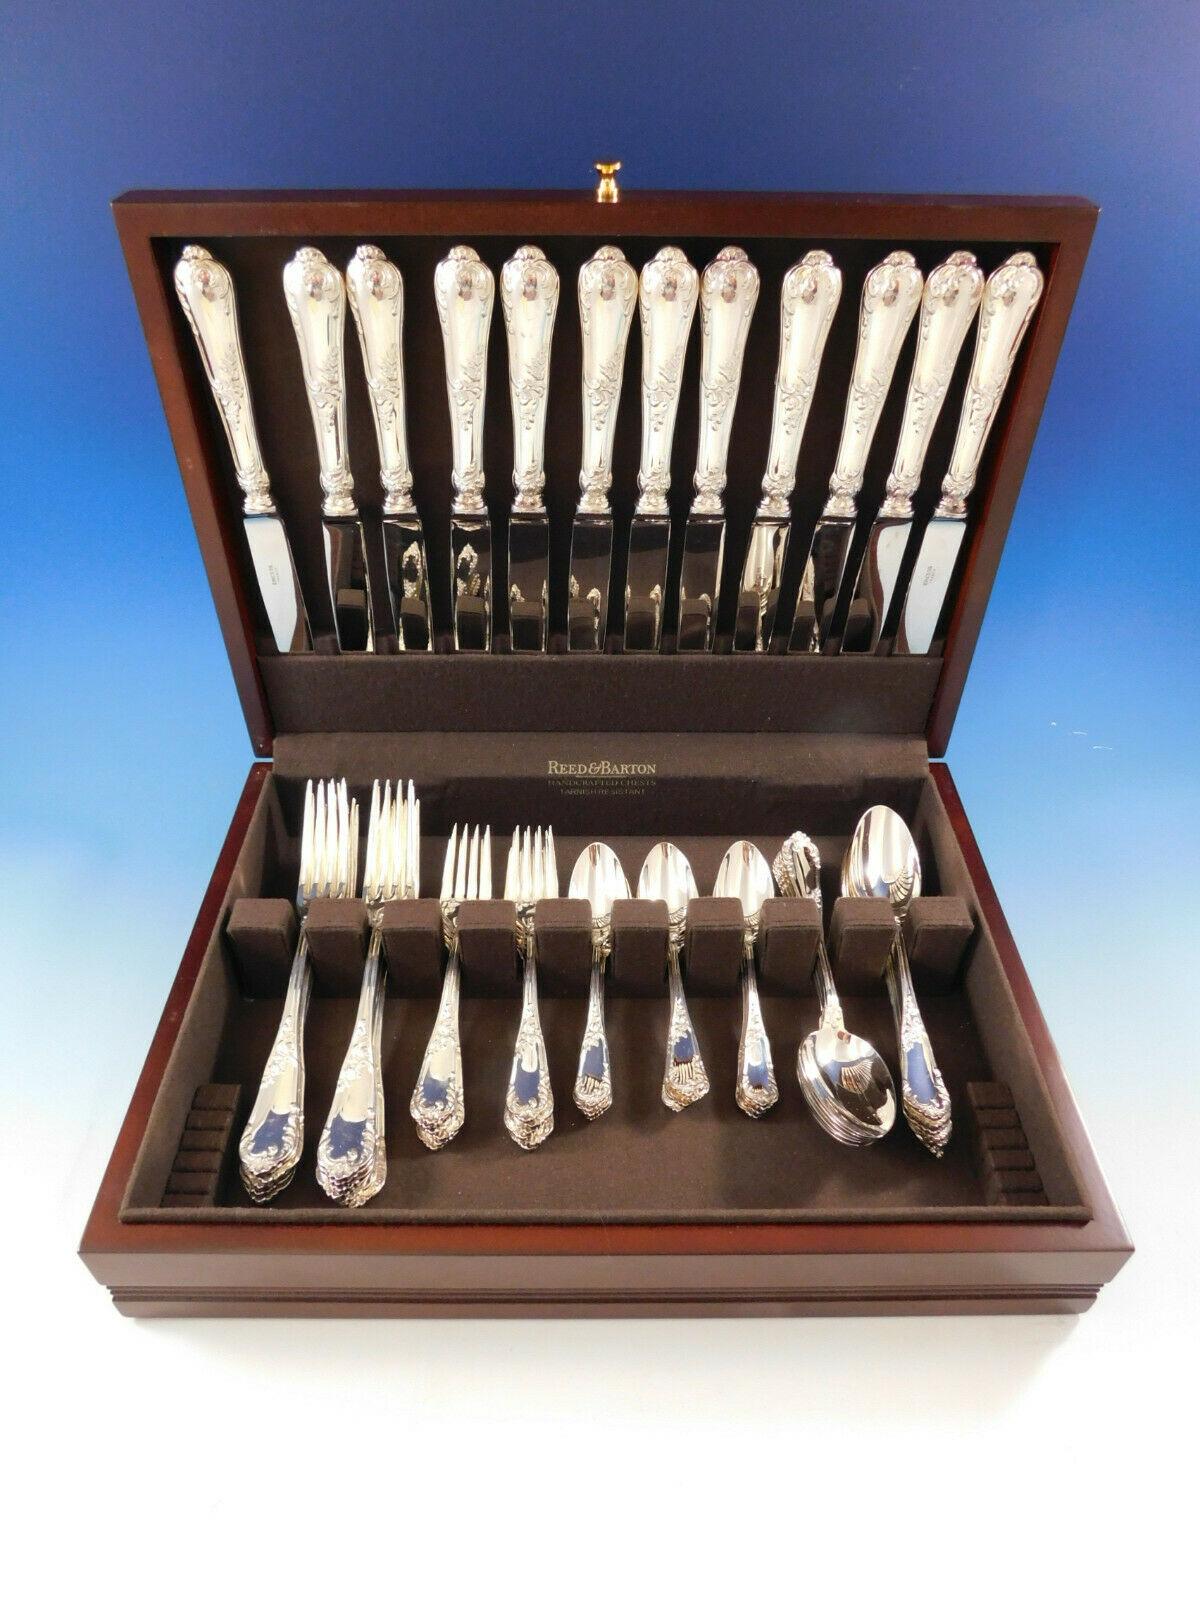 Rocaille by Ercuis Paris Sterling silver dinner flatware set, 60 pieces. This set includes:

12 dinner knives, 10 1/2